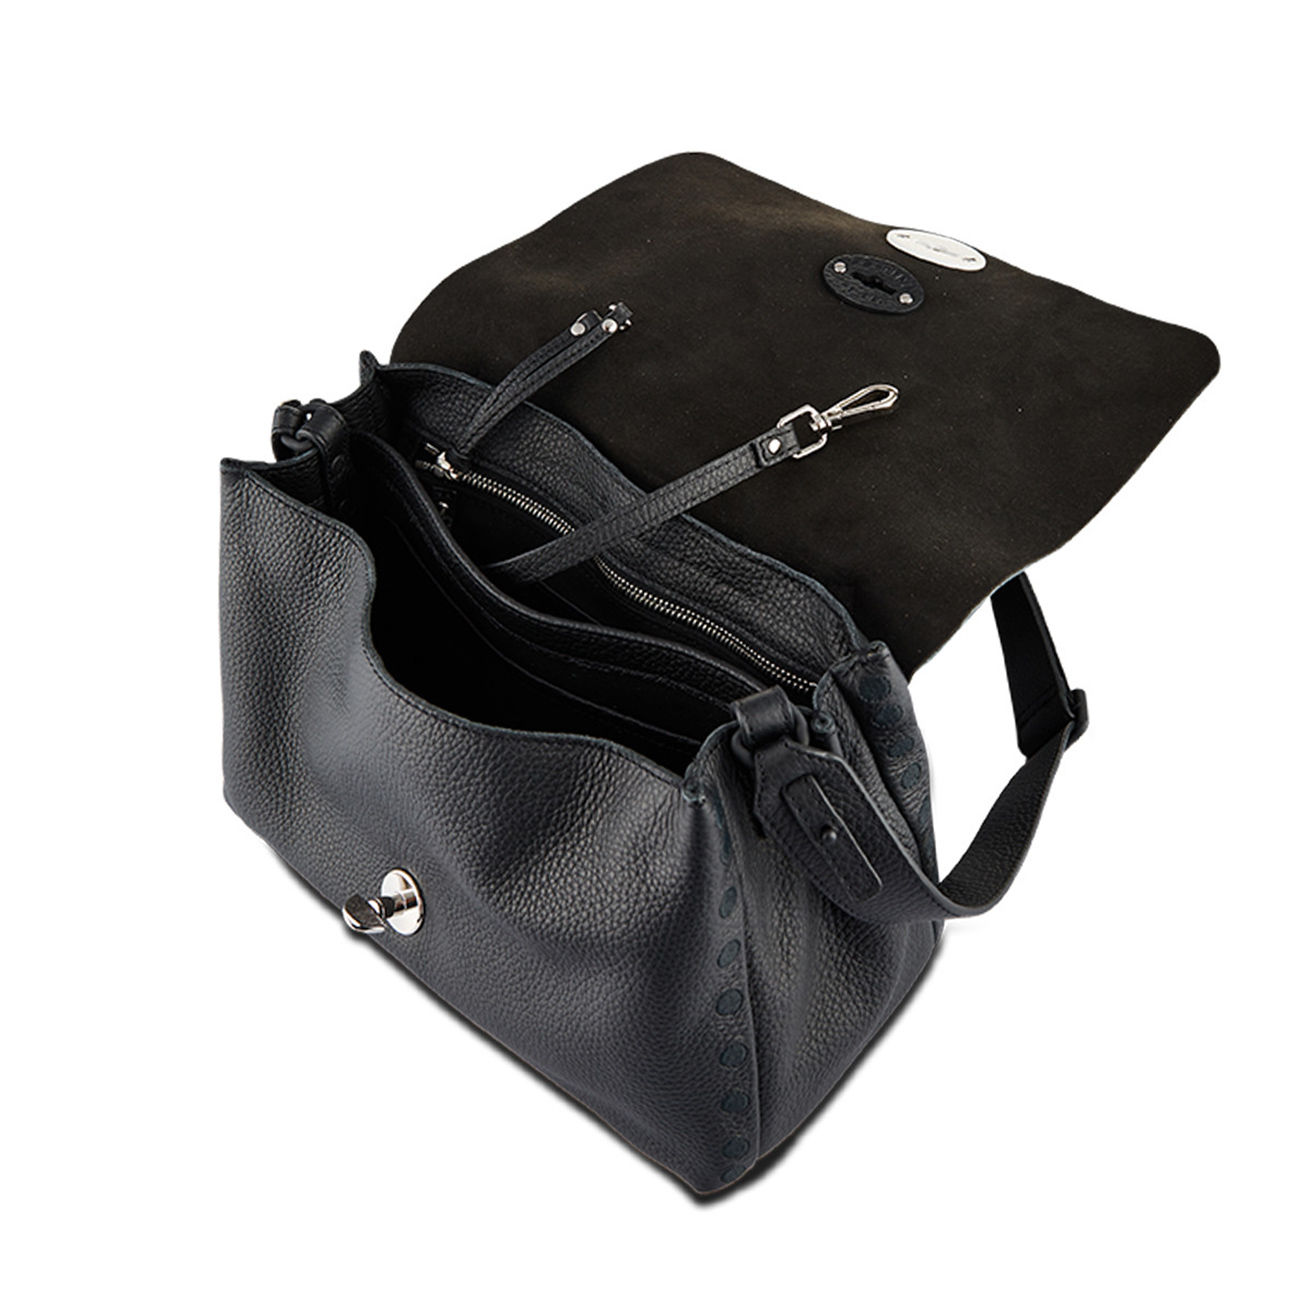 Buy BAG GYM S from the ACCESSORIES for UNISEX catalog. 211993_5I1-TU